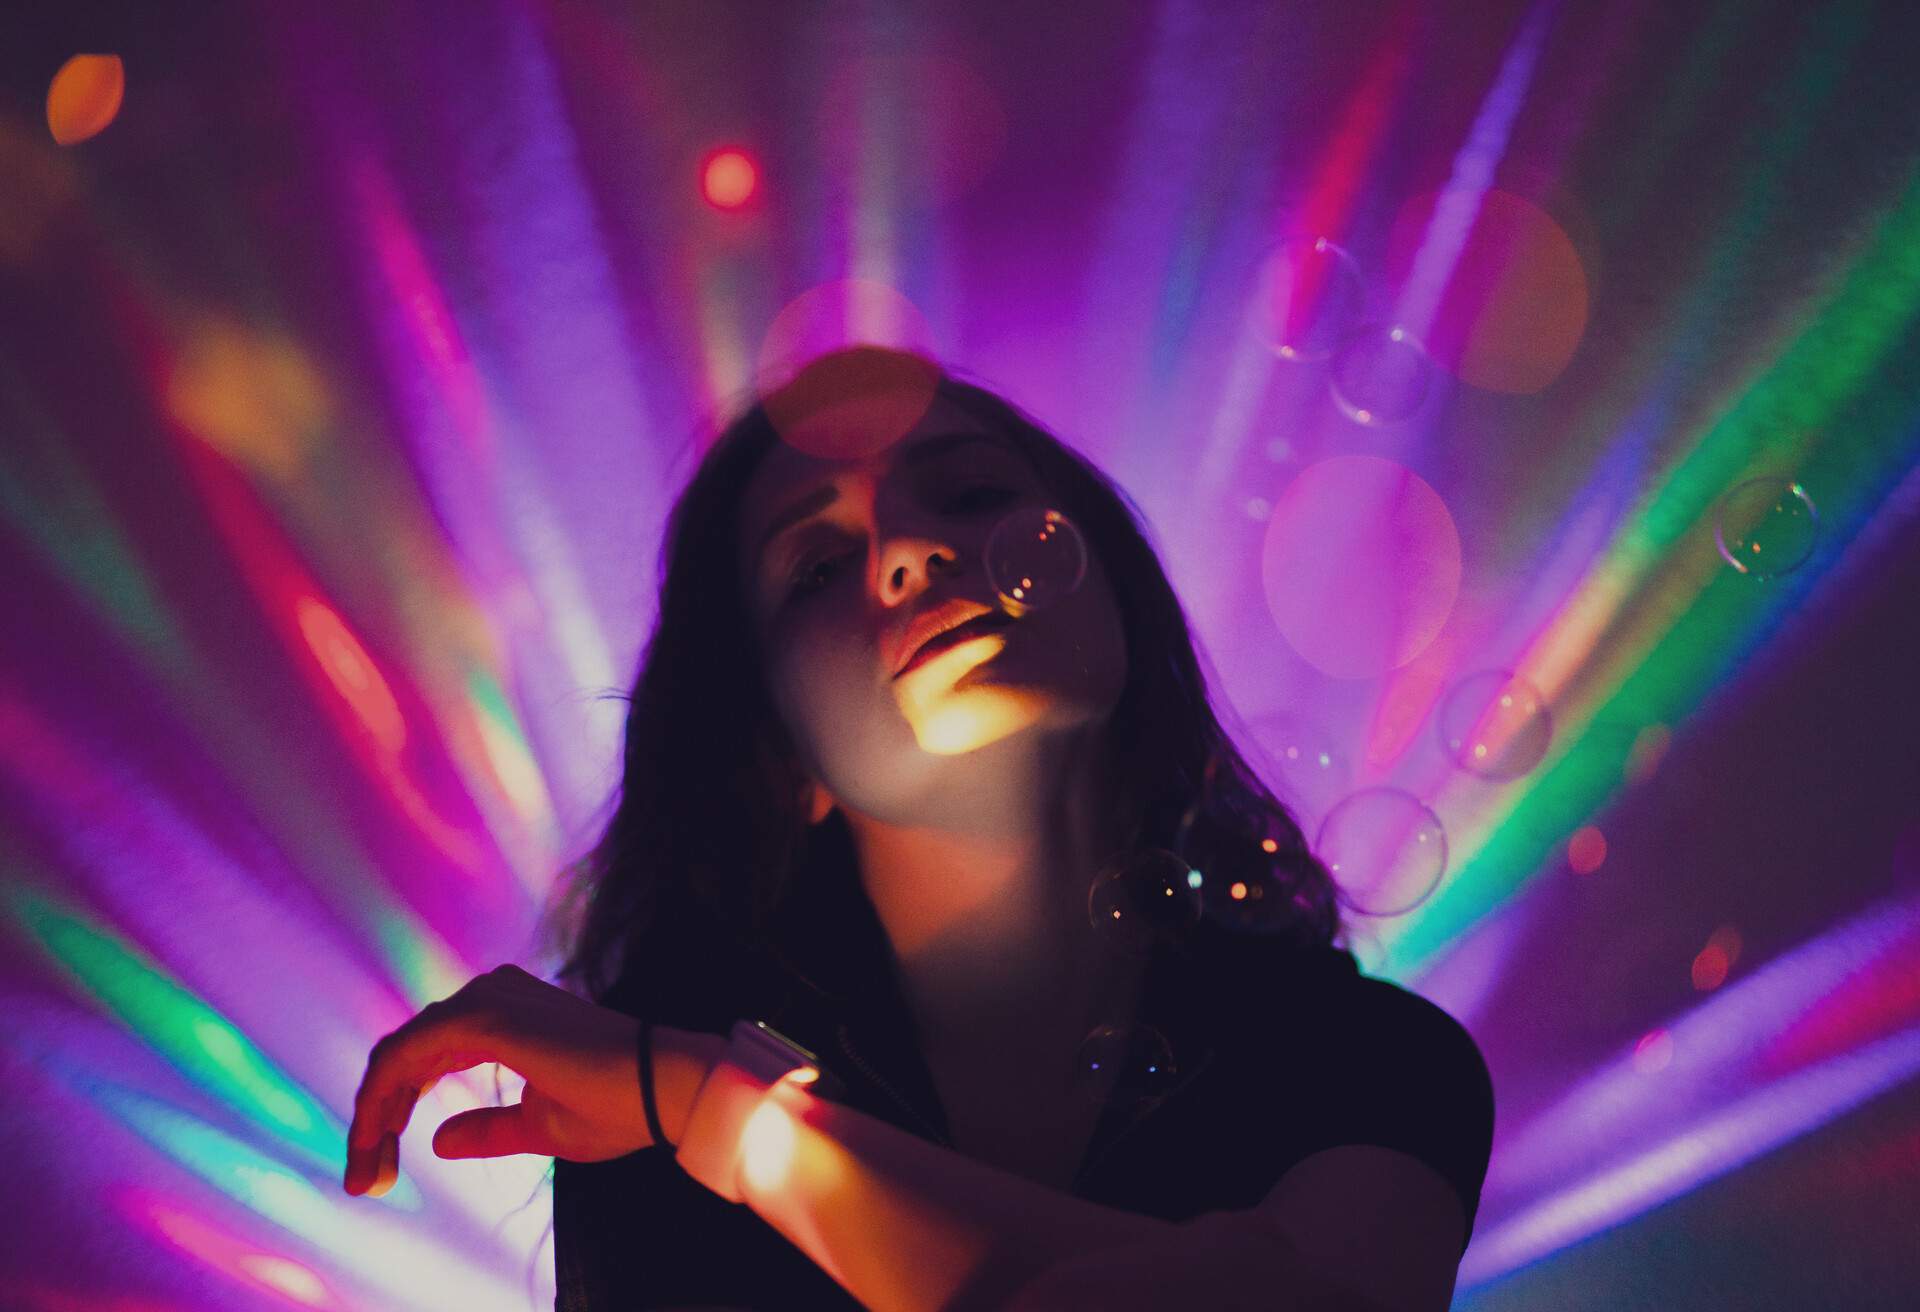 A woman chilling in the dark surrounded by floating bubbles and colourful light streaks.